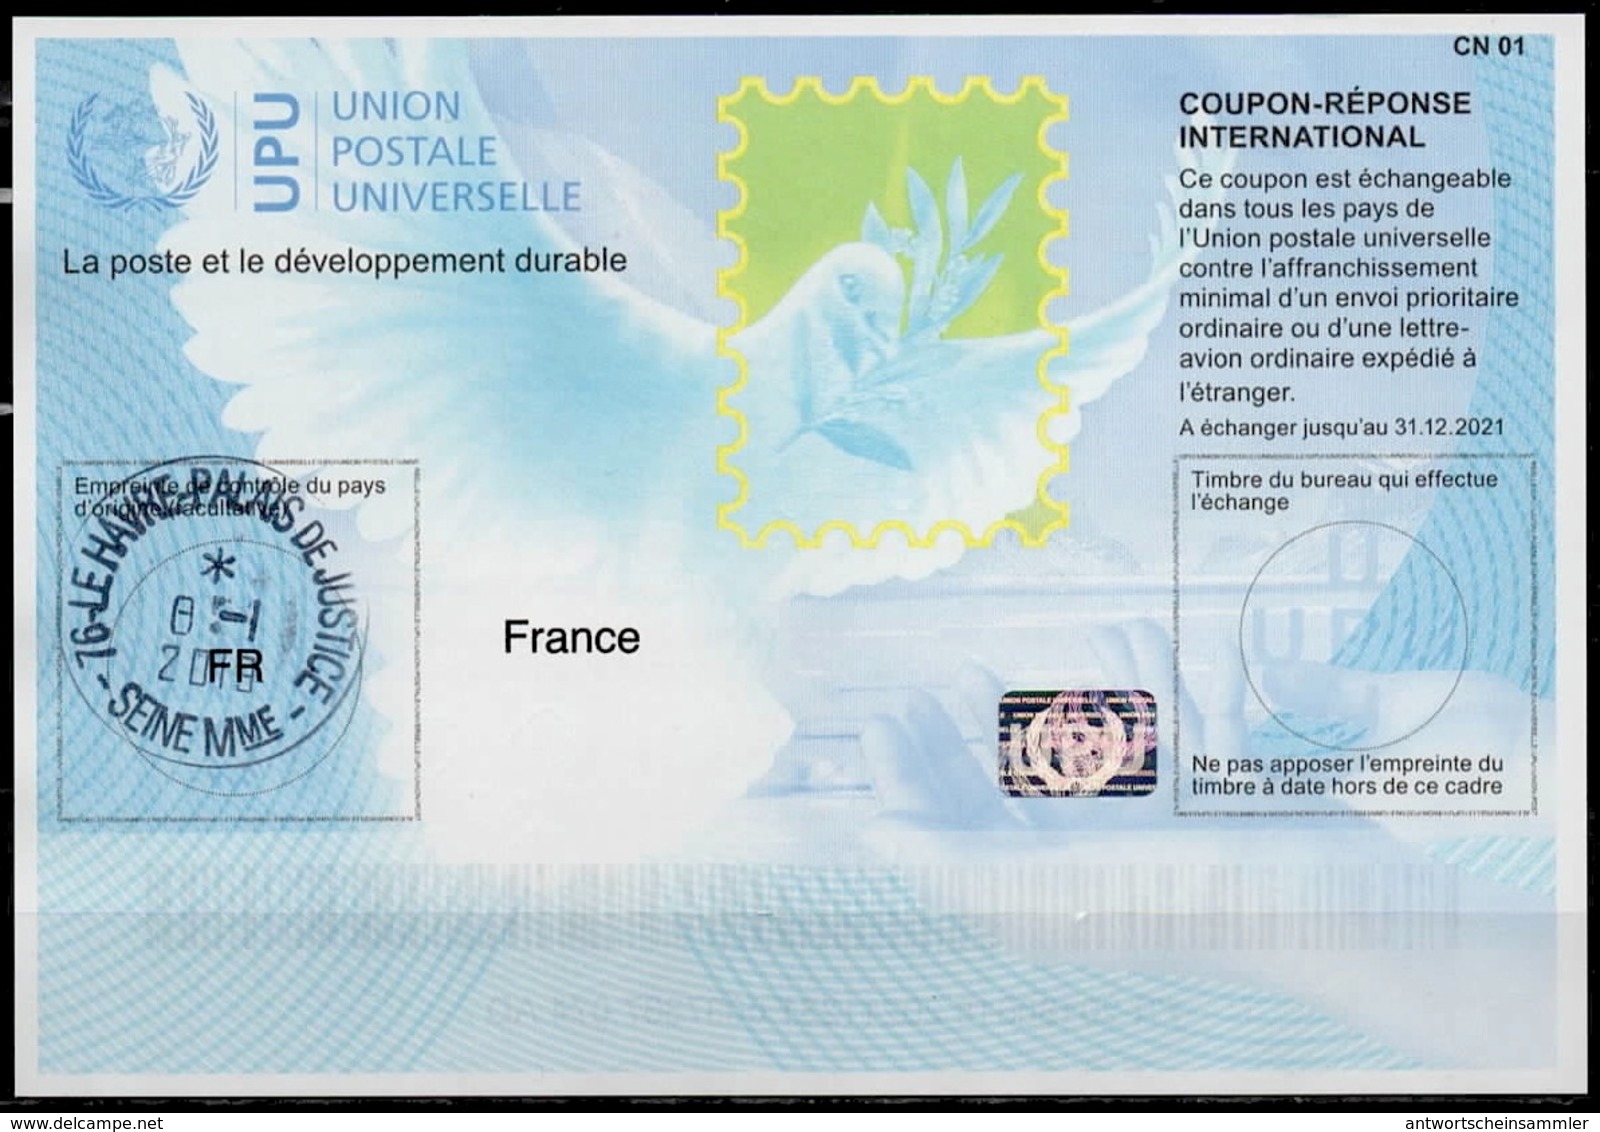 FRANCE  Is40  20180618 AD  International Reply Coupon Reponse Antwortschein IRC IAS  Hologram Mint O LE HAVRE 08.01.2019 - Antwortscheine